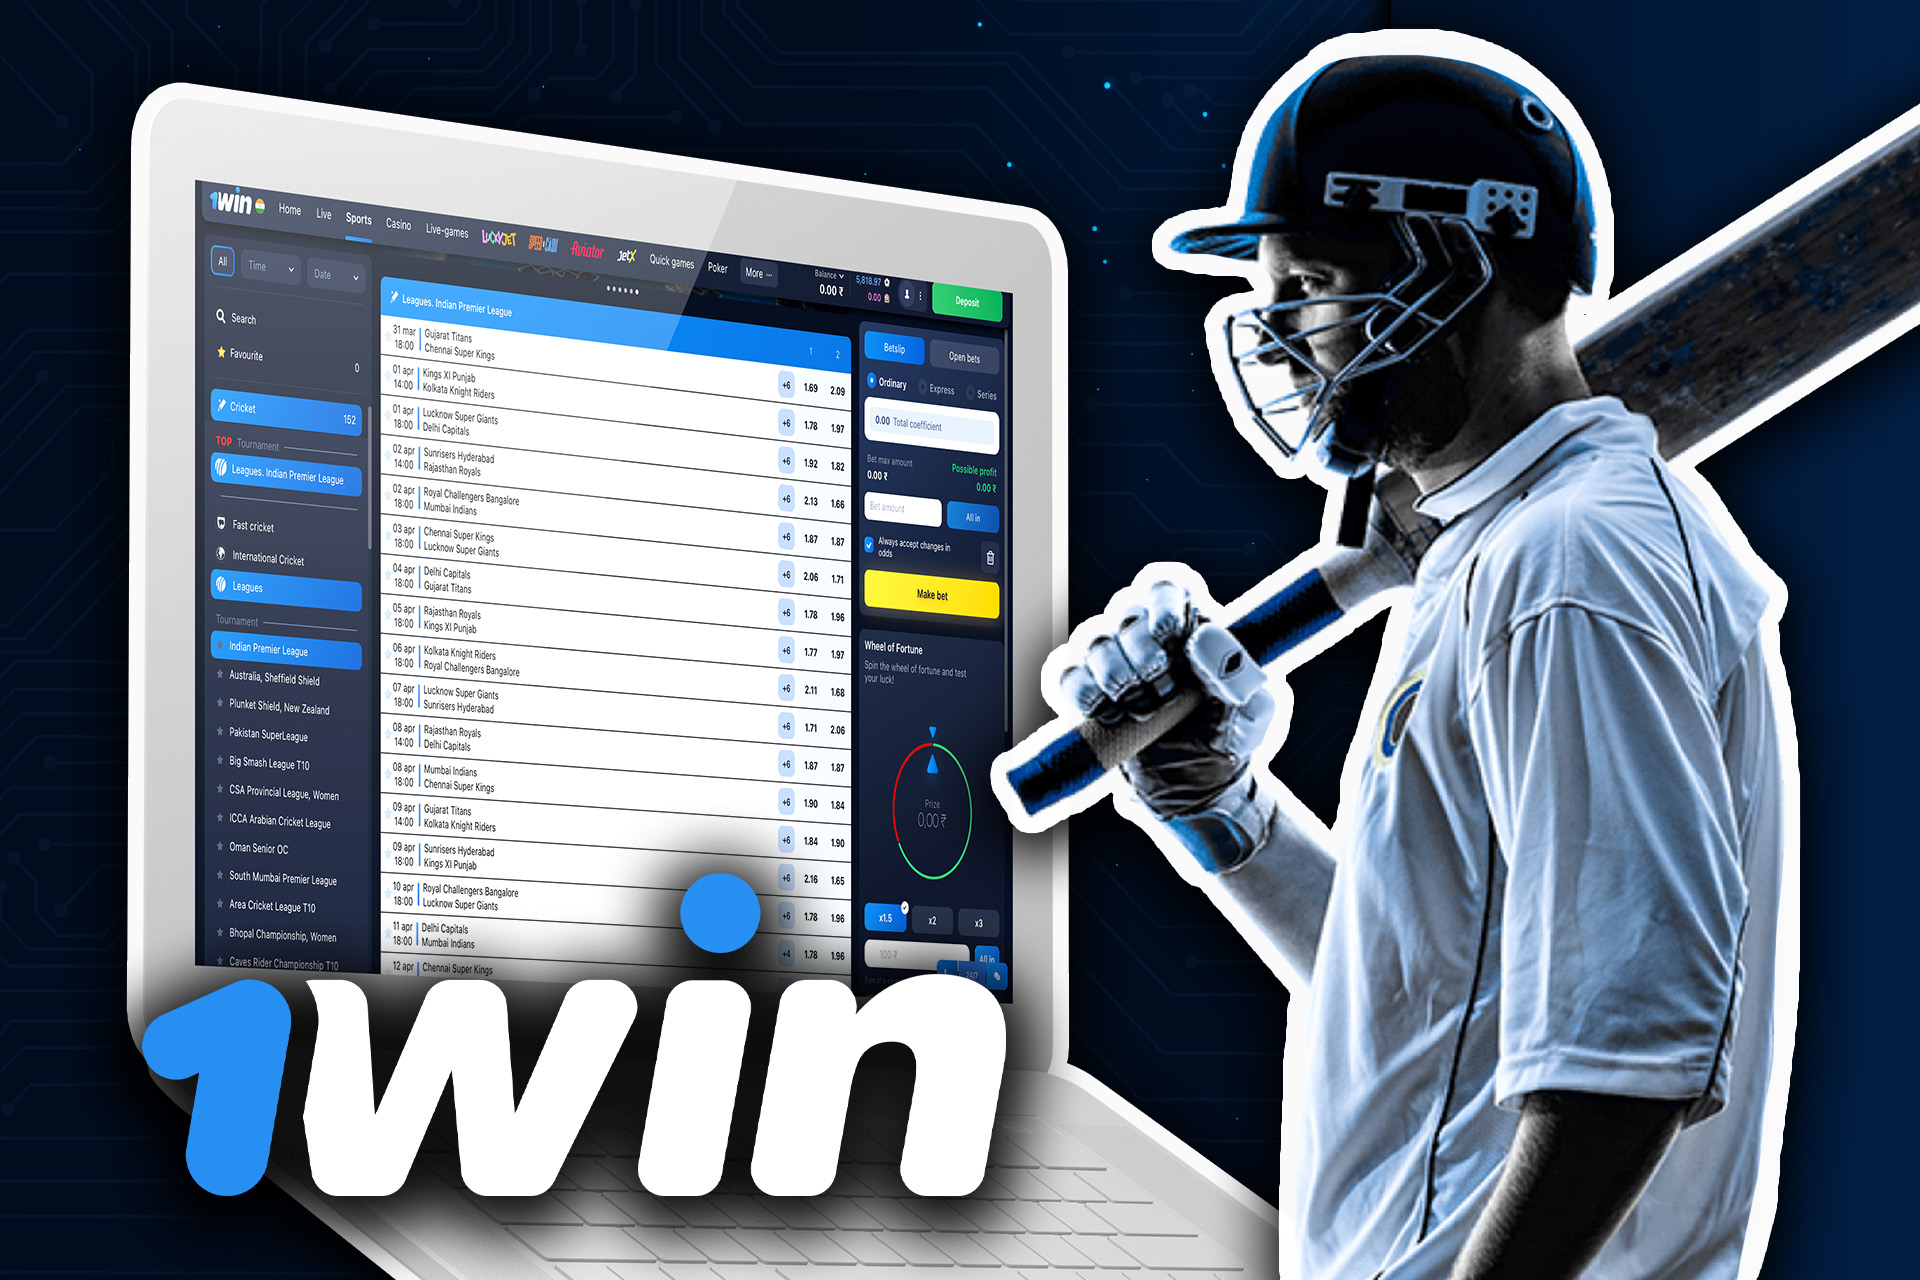 Cricket is the most popular betting option on 1win.